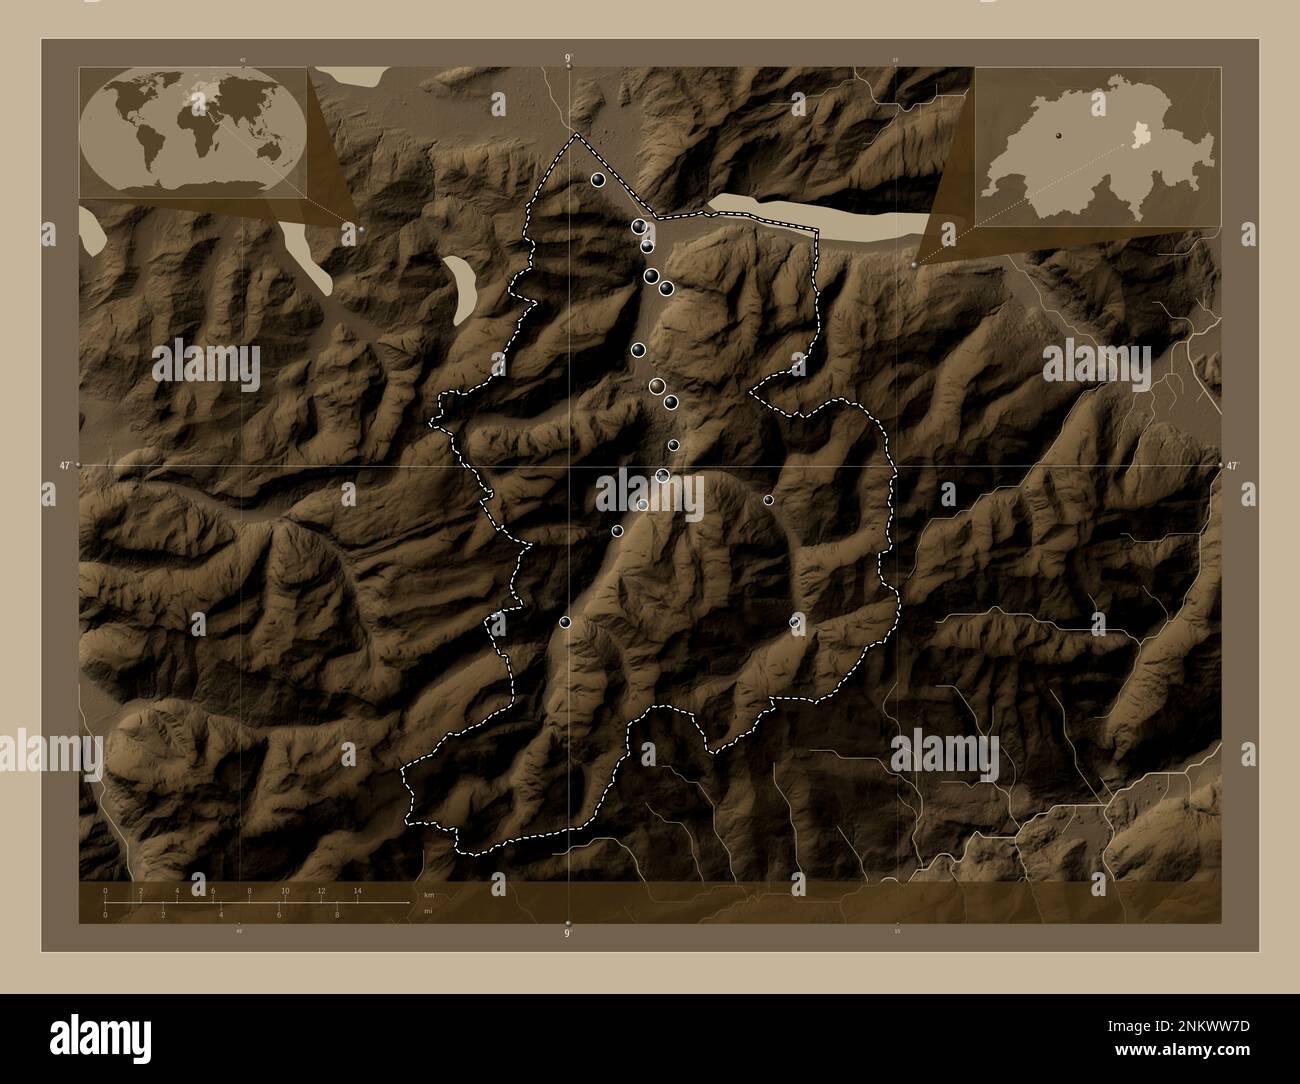 Glarus, canton of Switzerland. Elevation map colored in sepia tones with lakes and rivers. Locations of major cities of the region. Corner auxiliary l Stock Photo